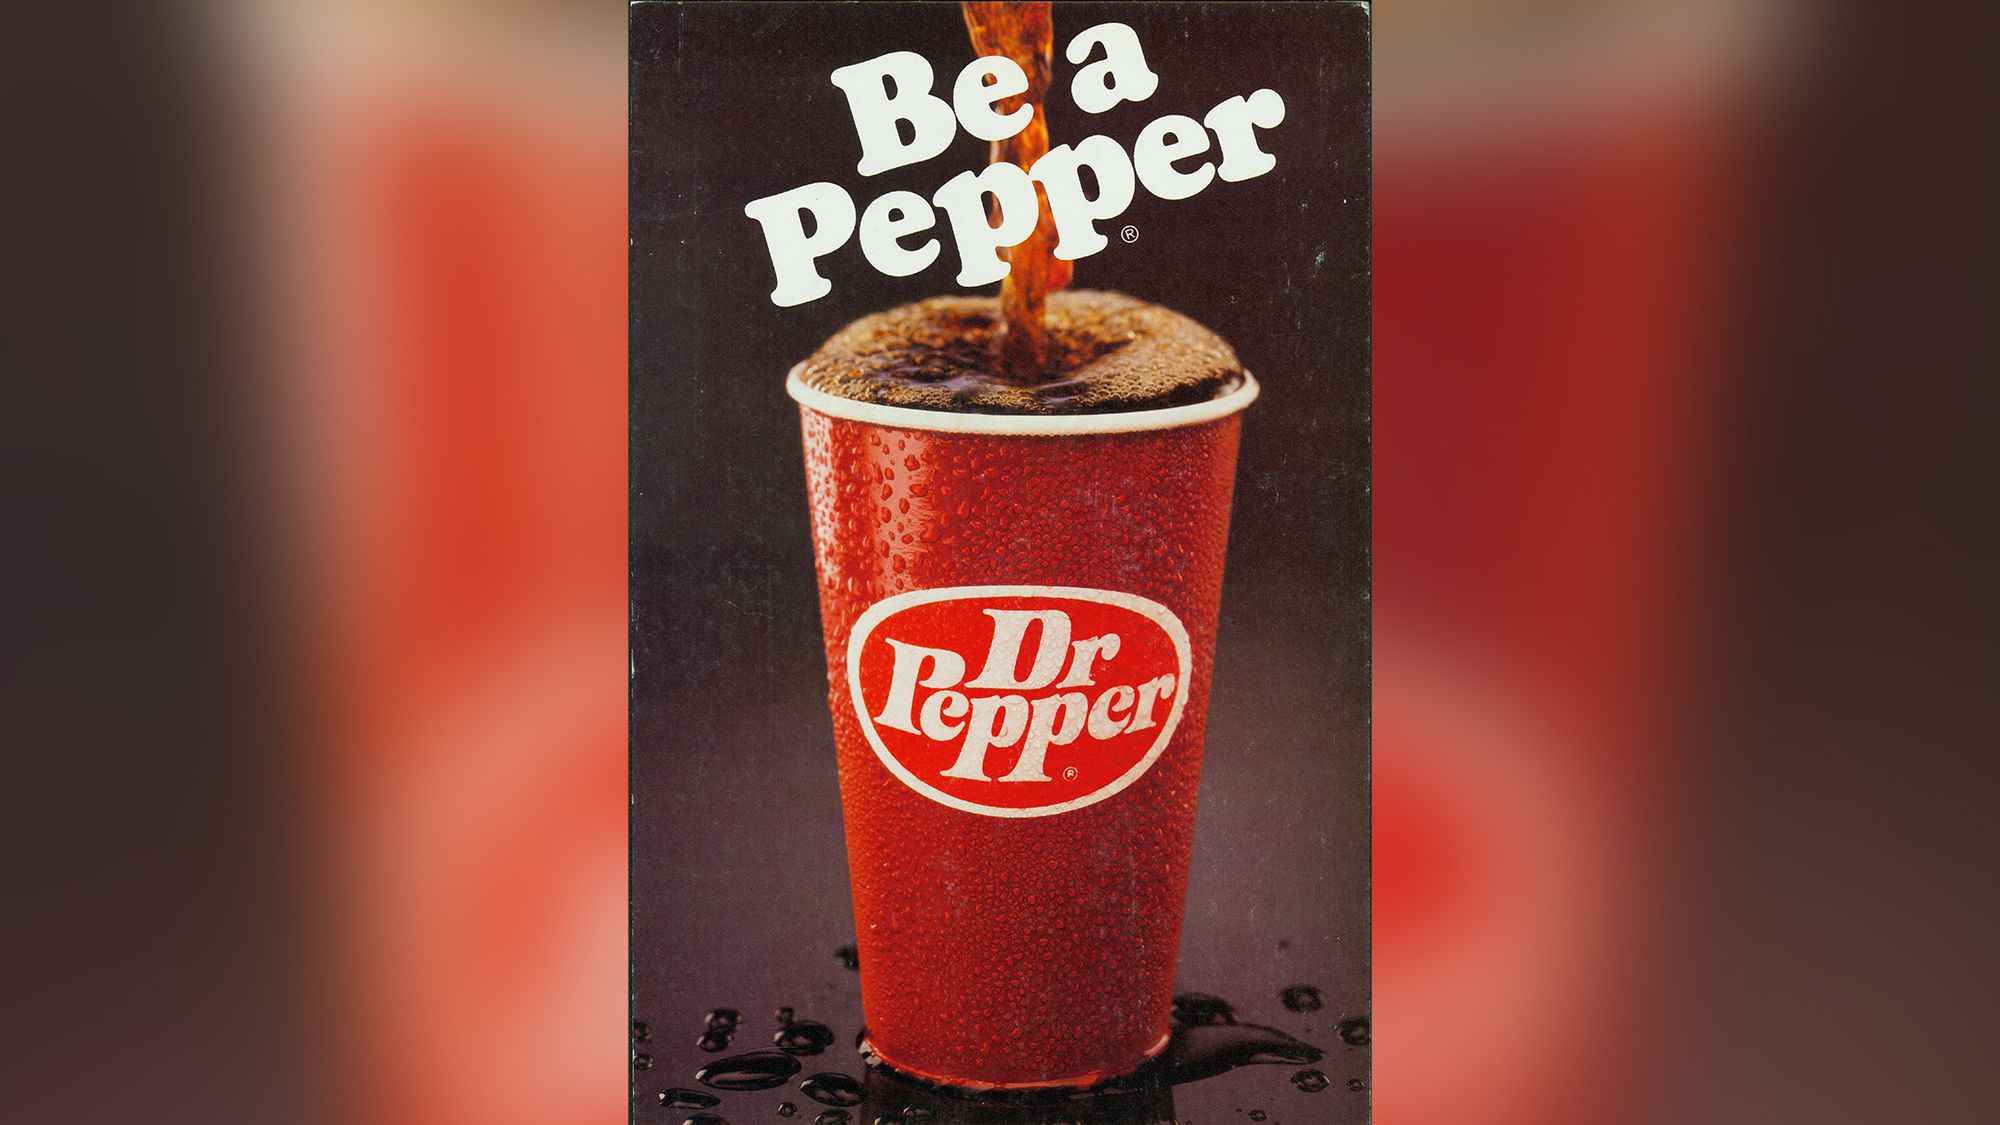 The soda market is flat, but not for Dr Pepper